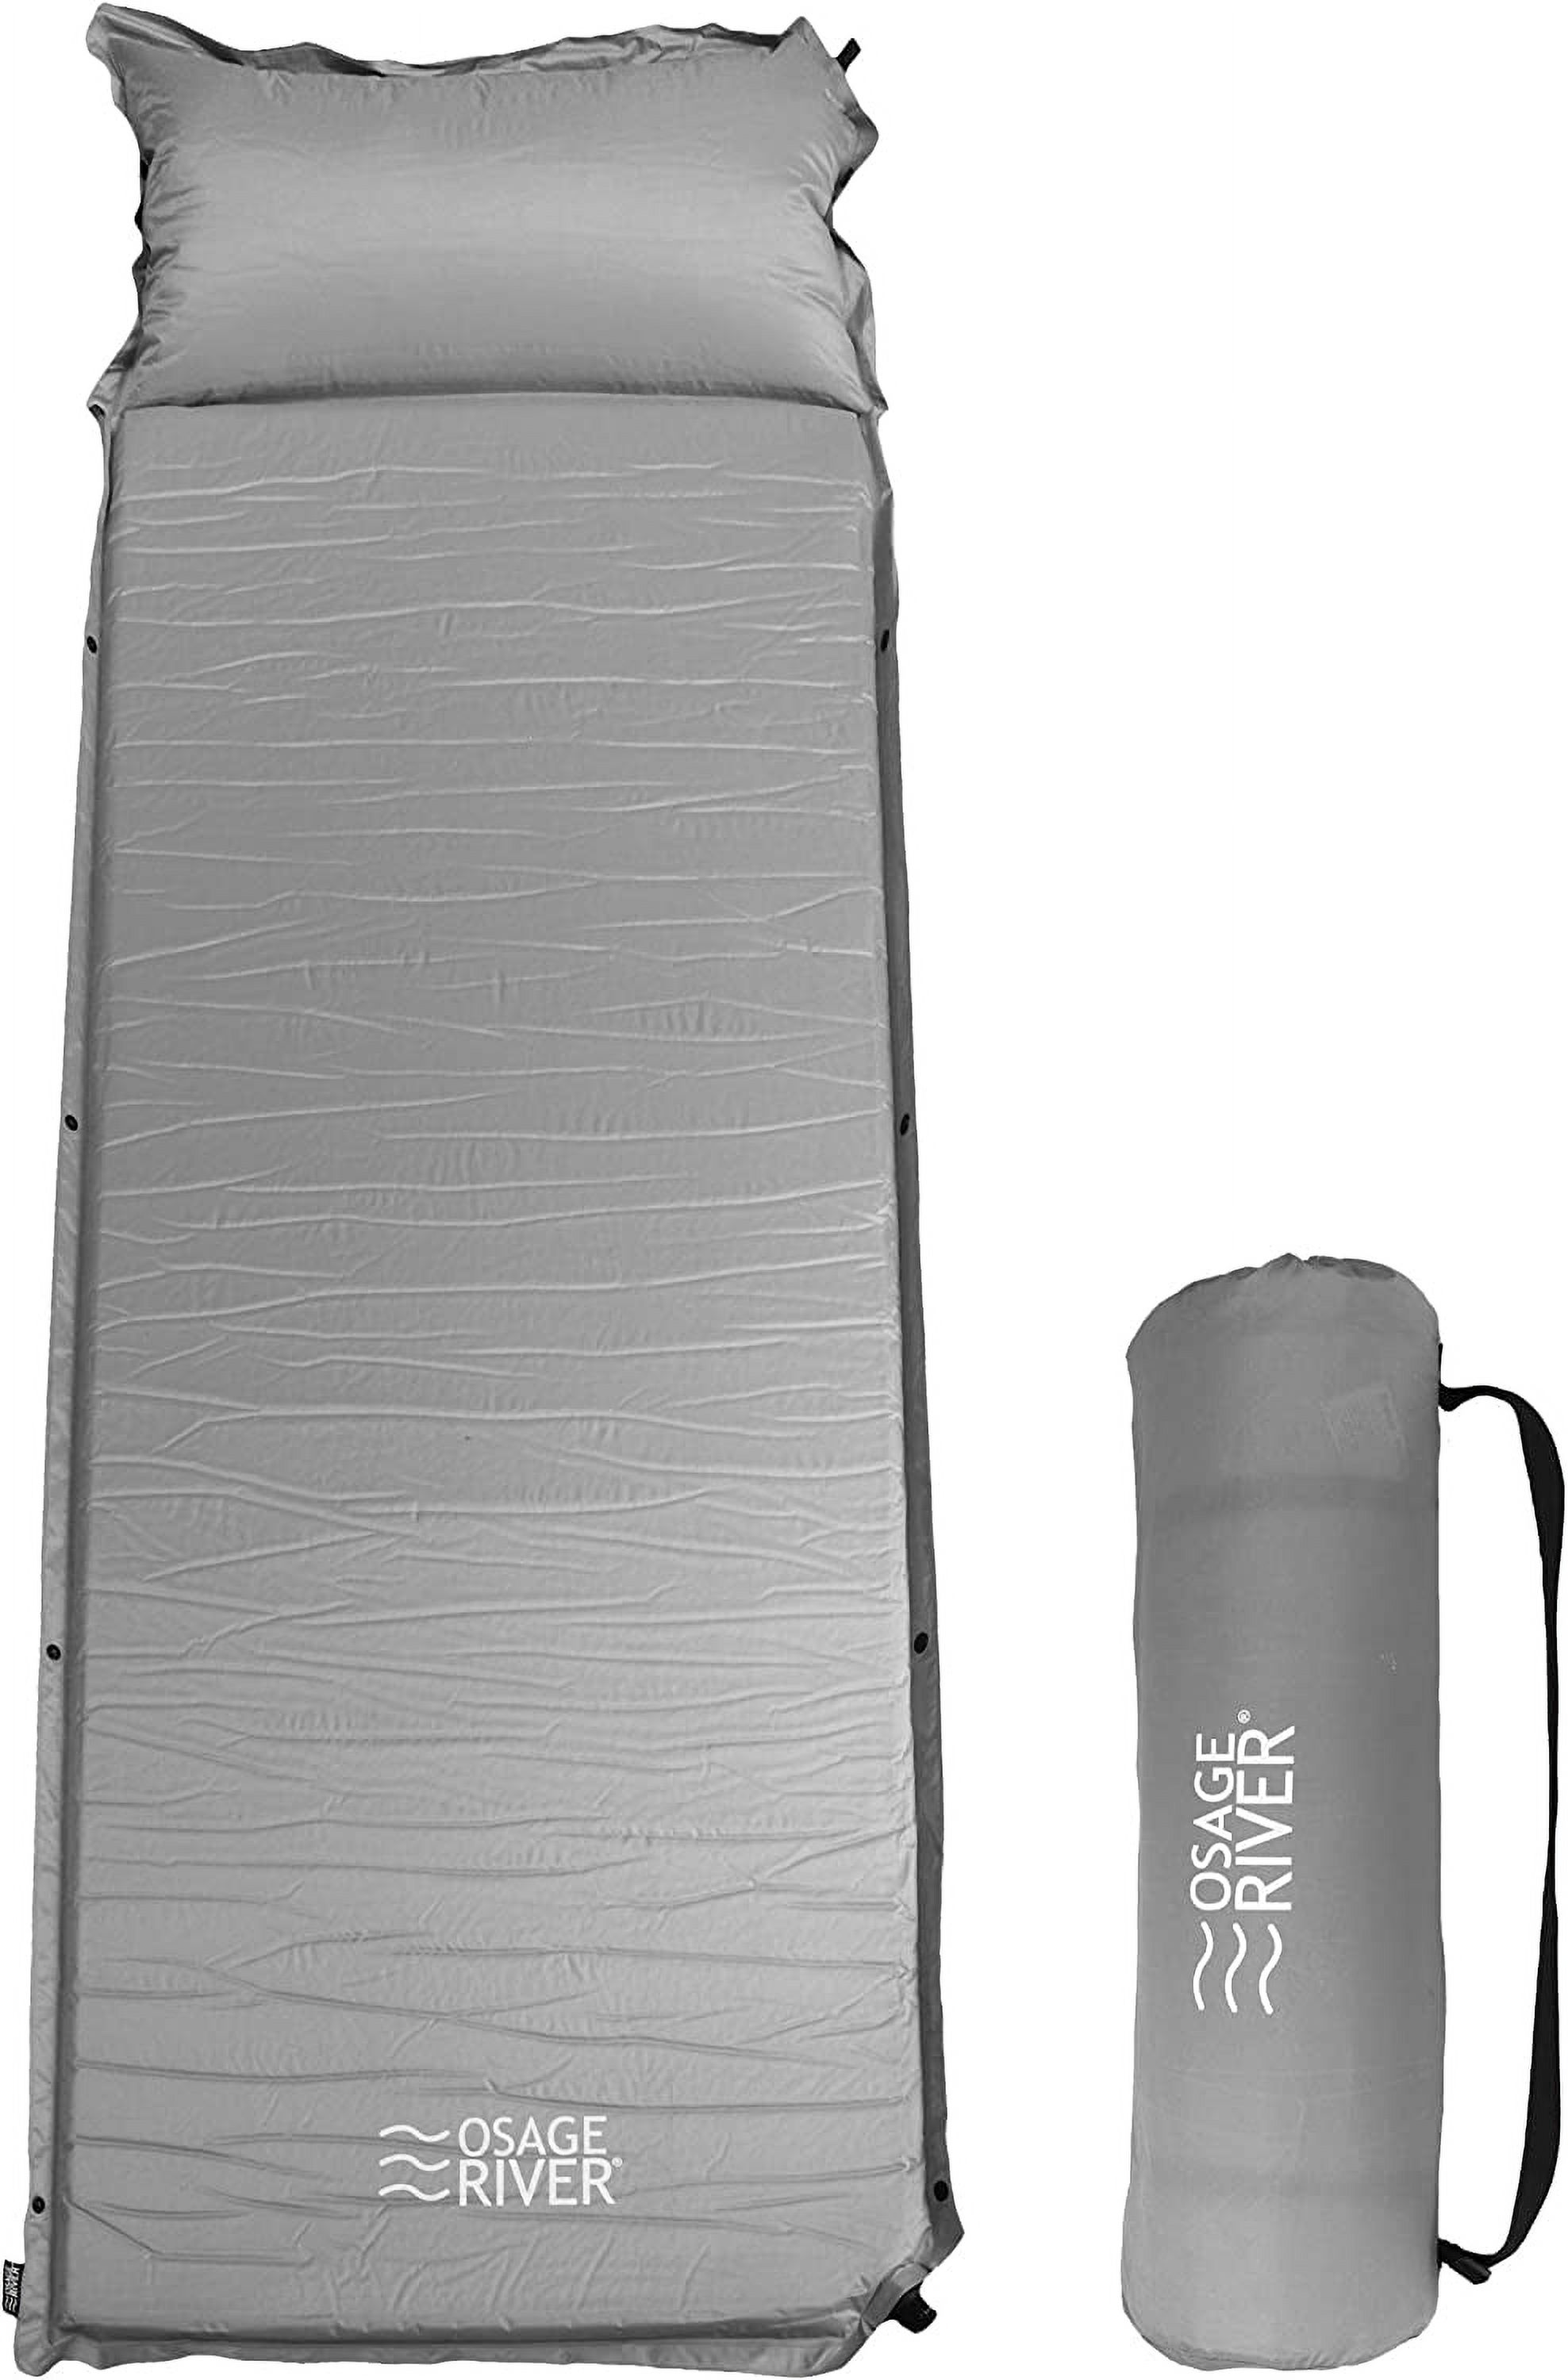 OSAGE RIVER Self Inflating Sleeping Pad with Built-in Pillow, Compact Memory Foam Sleep Mat, Camping Air Mattress for Tent, Travel, Backpacking, or Hiking, Grey - image 1 of 6